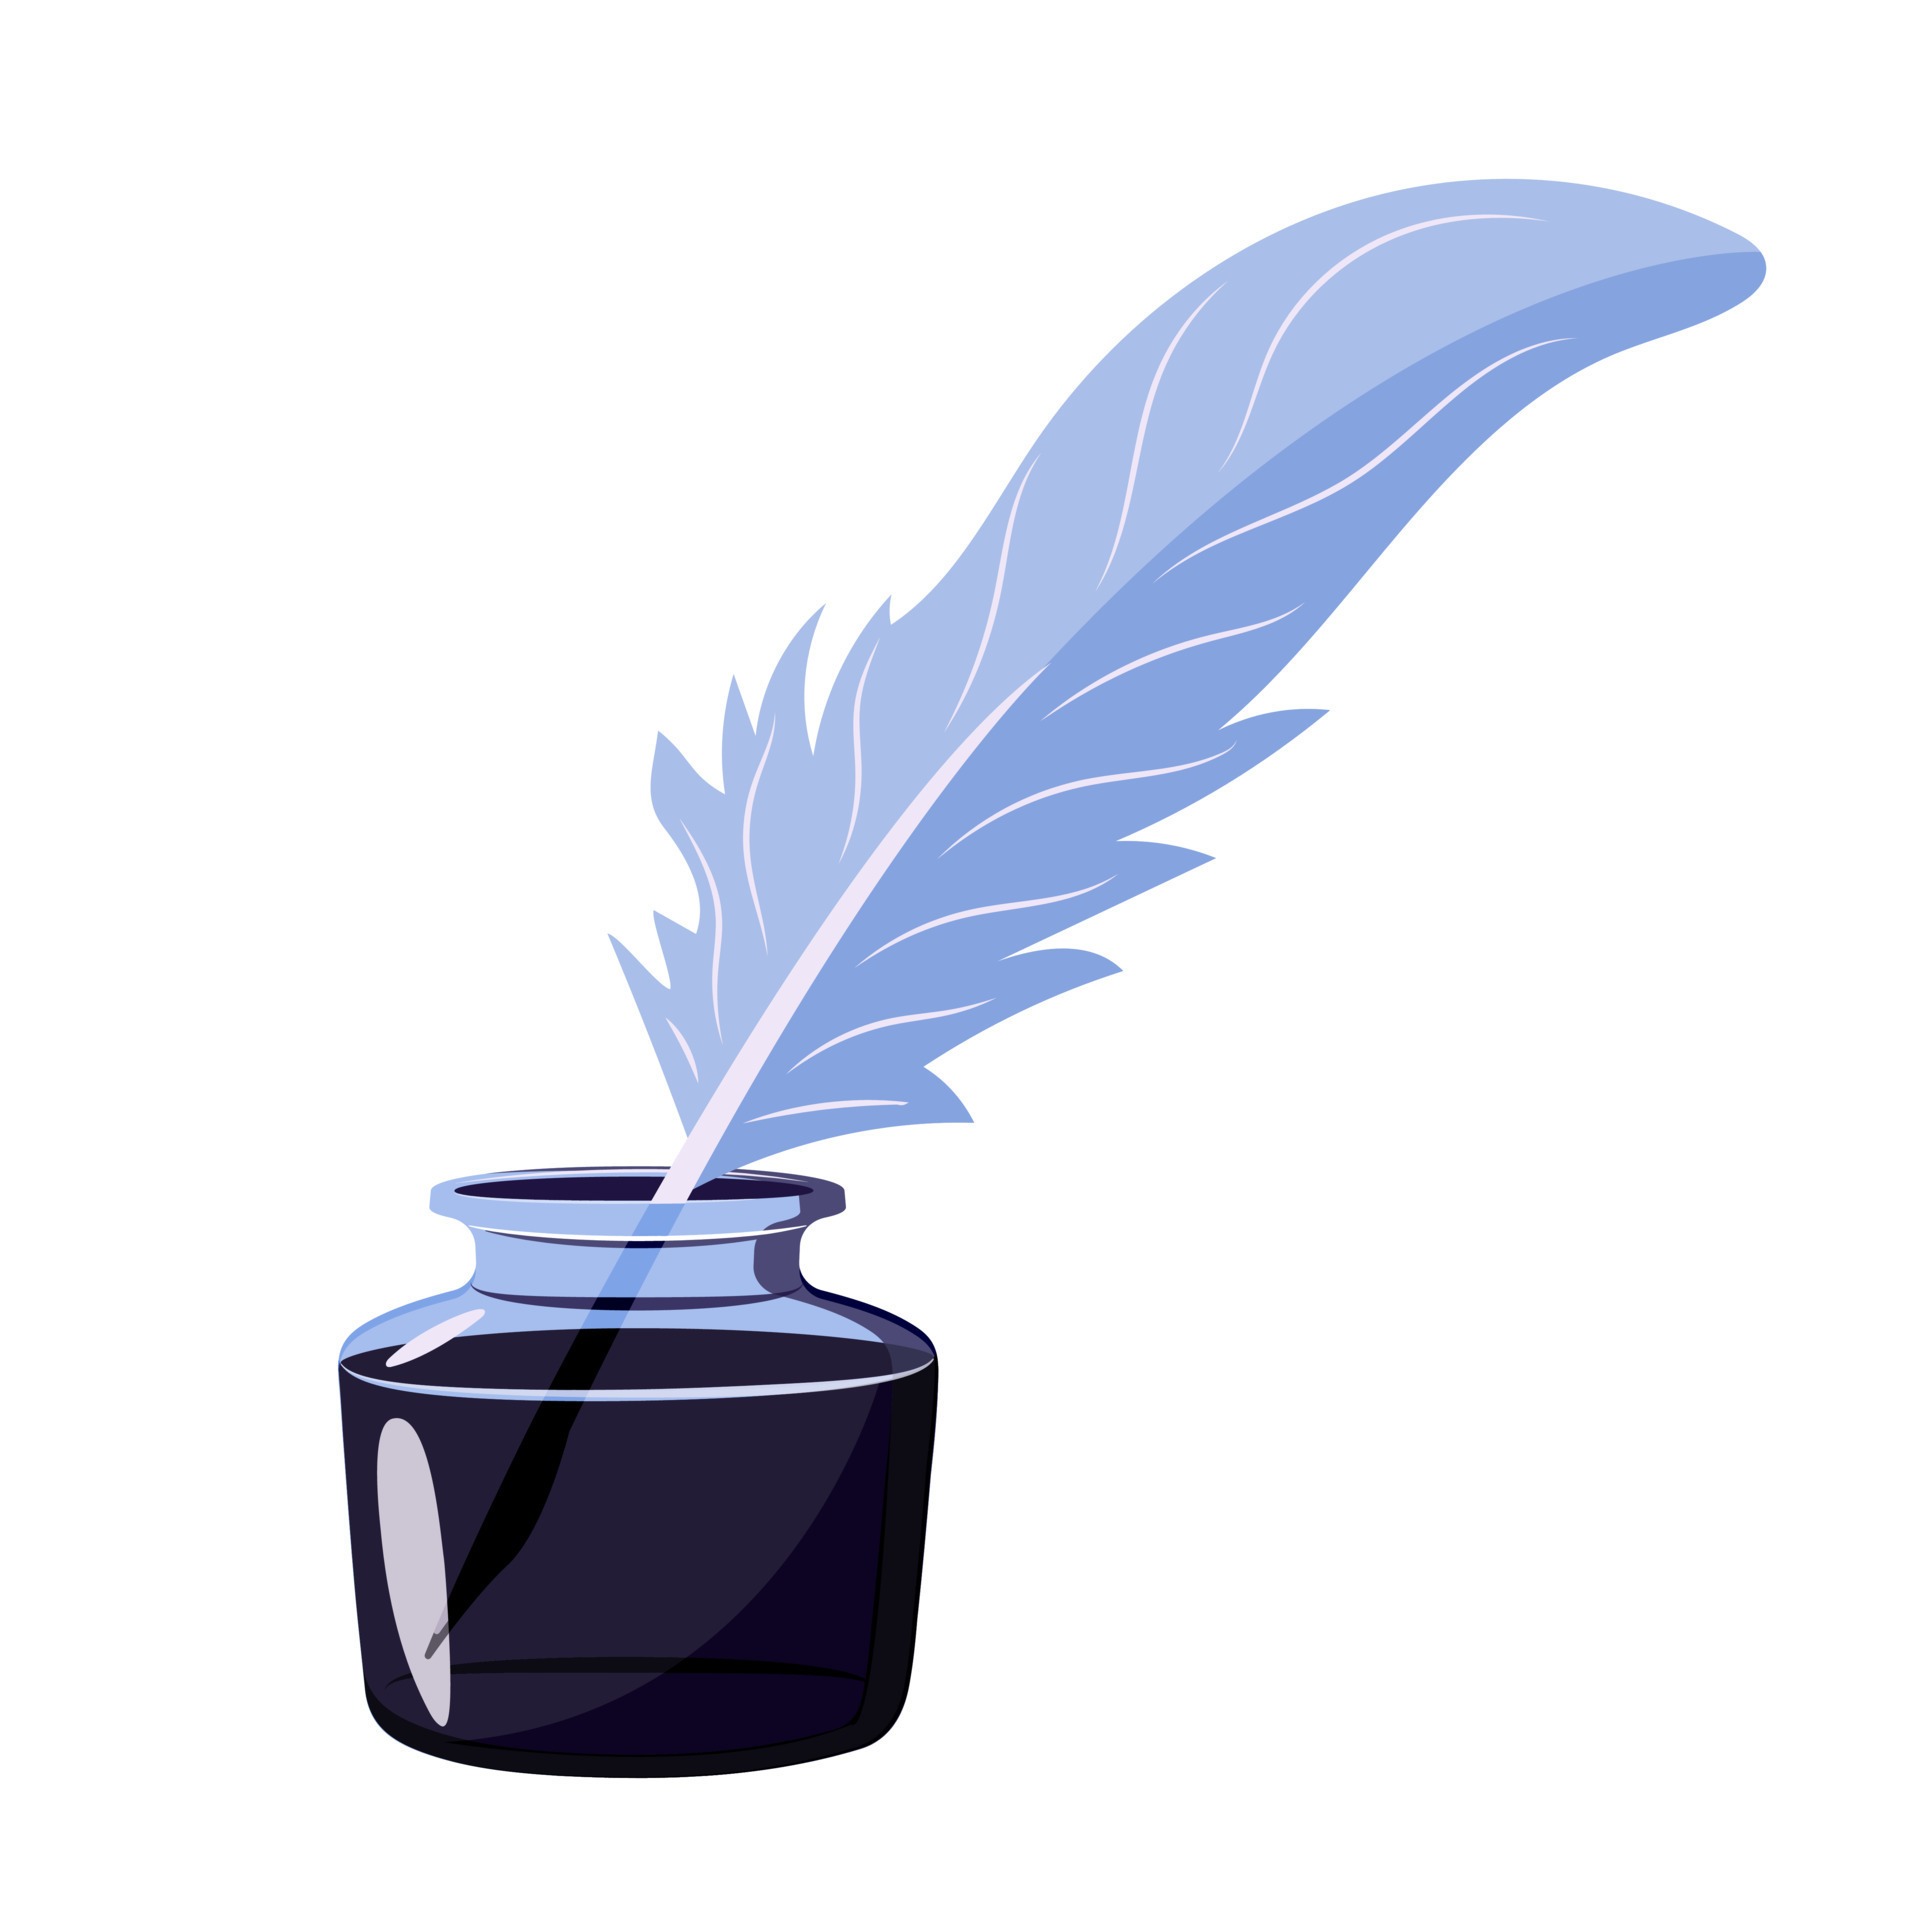 https://static.vecteezy.com/system/resources/previews/010/553/907/original/inkwell-with-feather-vintage-writing-utensils-in-cartoon-style-vector.jpg